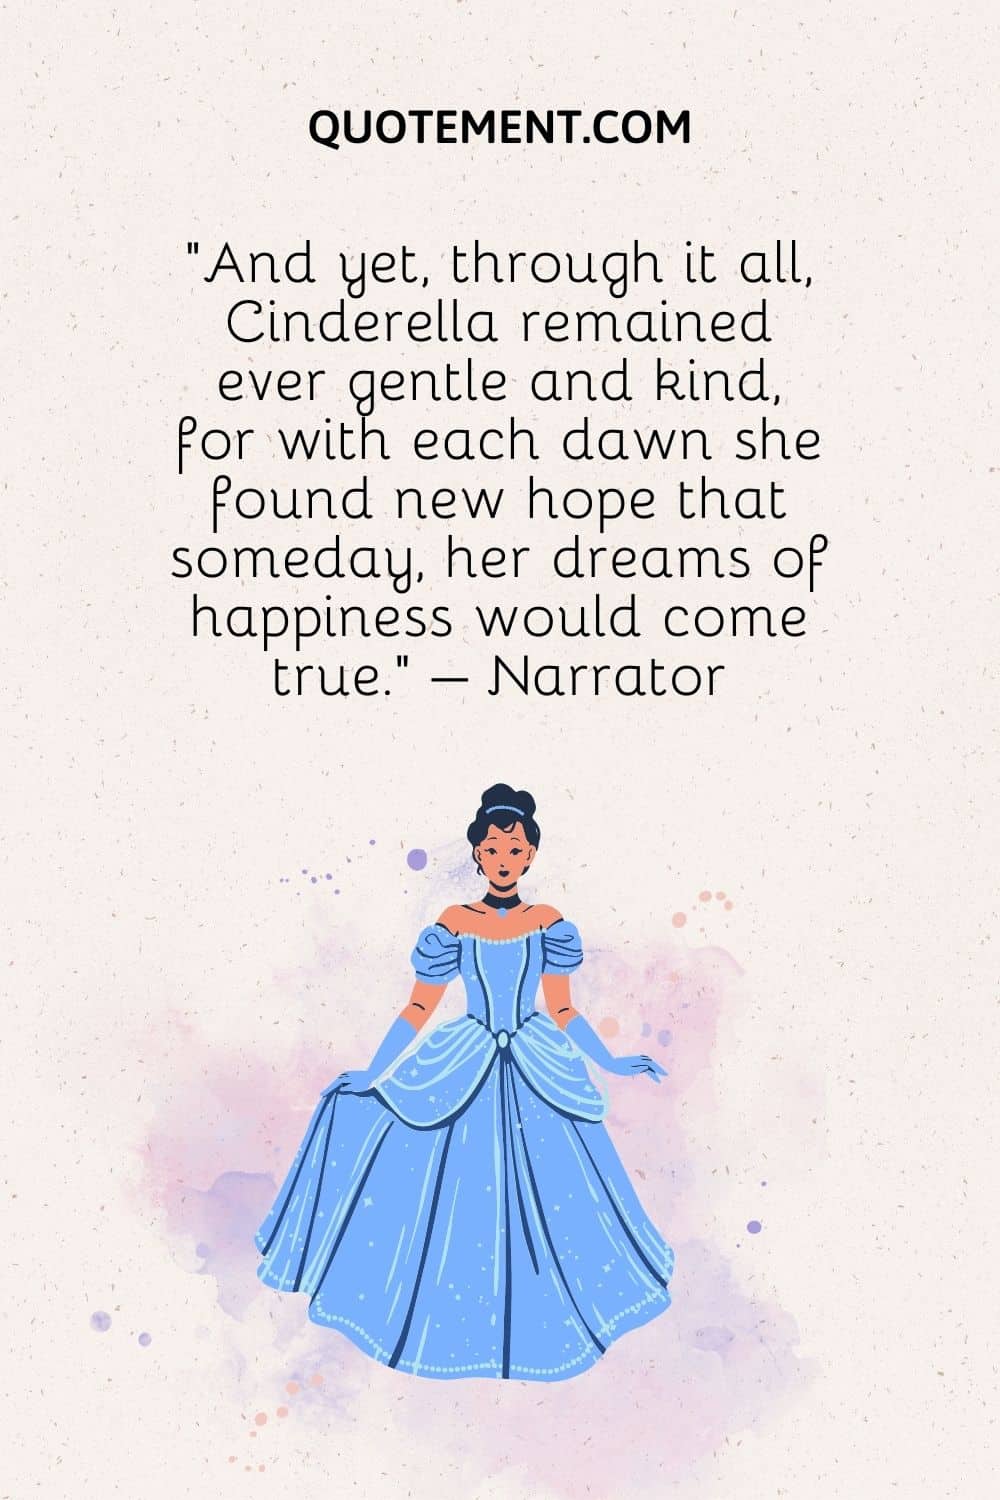 And yet, through it all, Cinderella remained ever gentle and kind